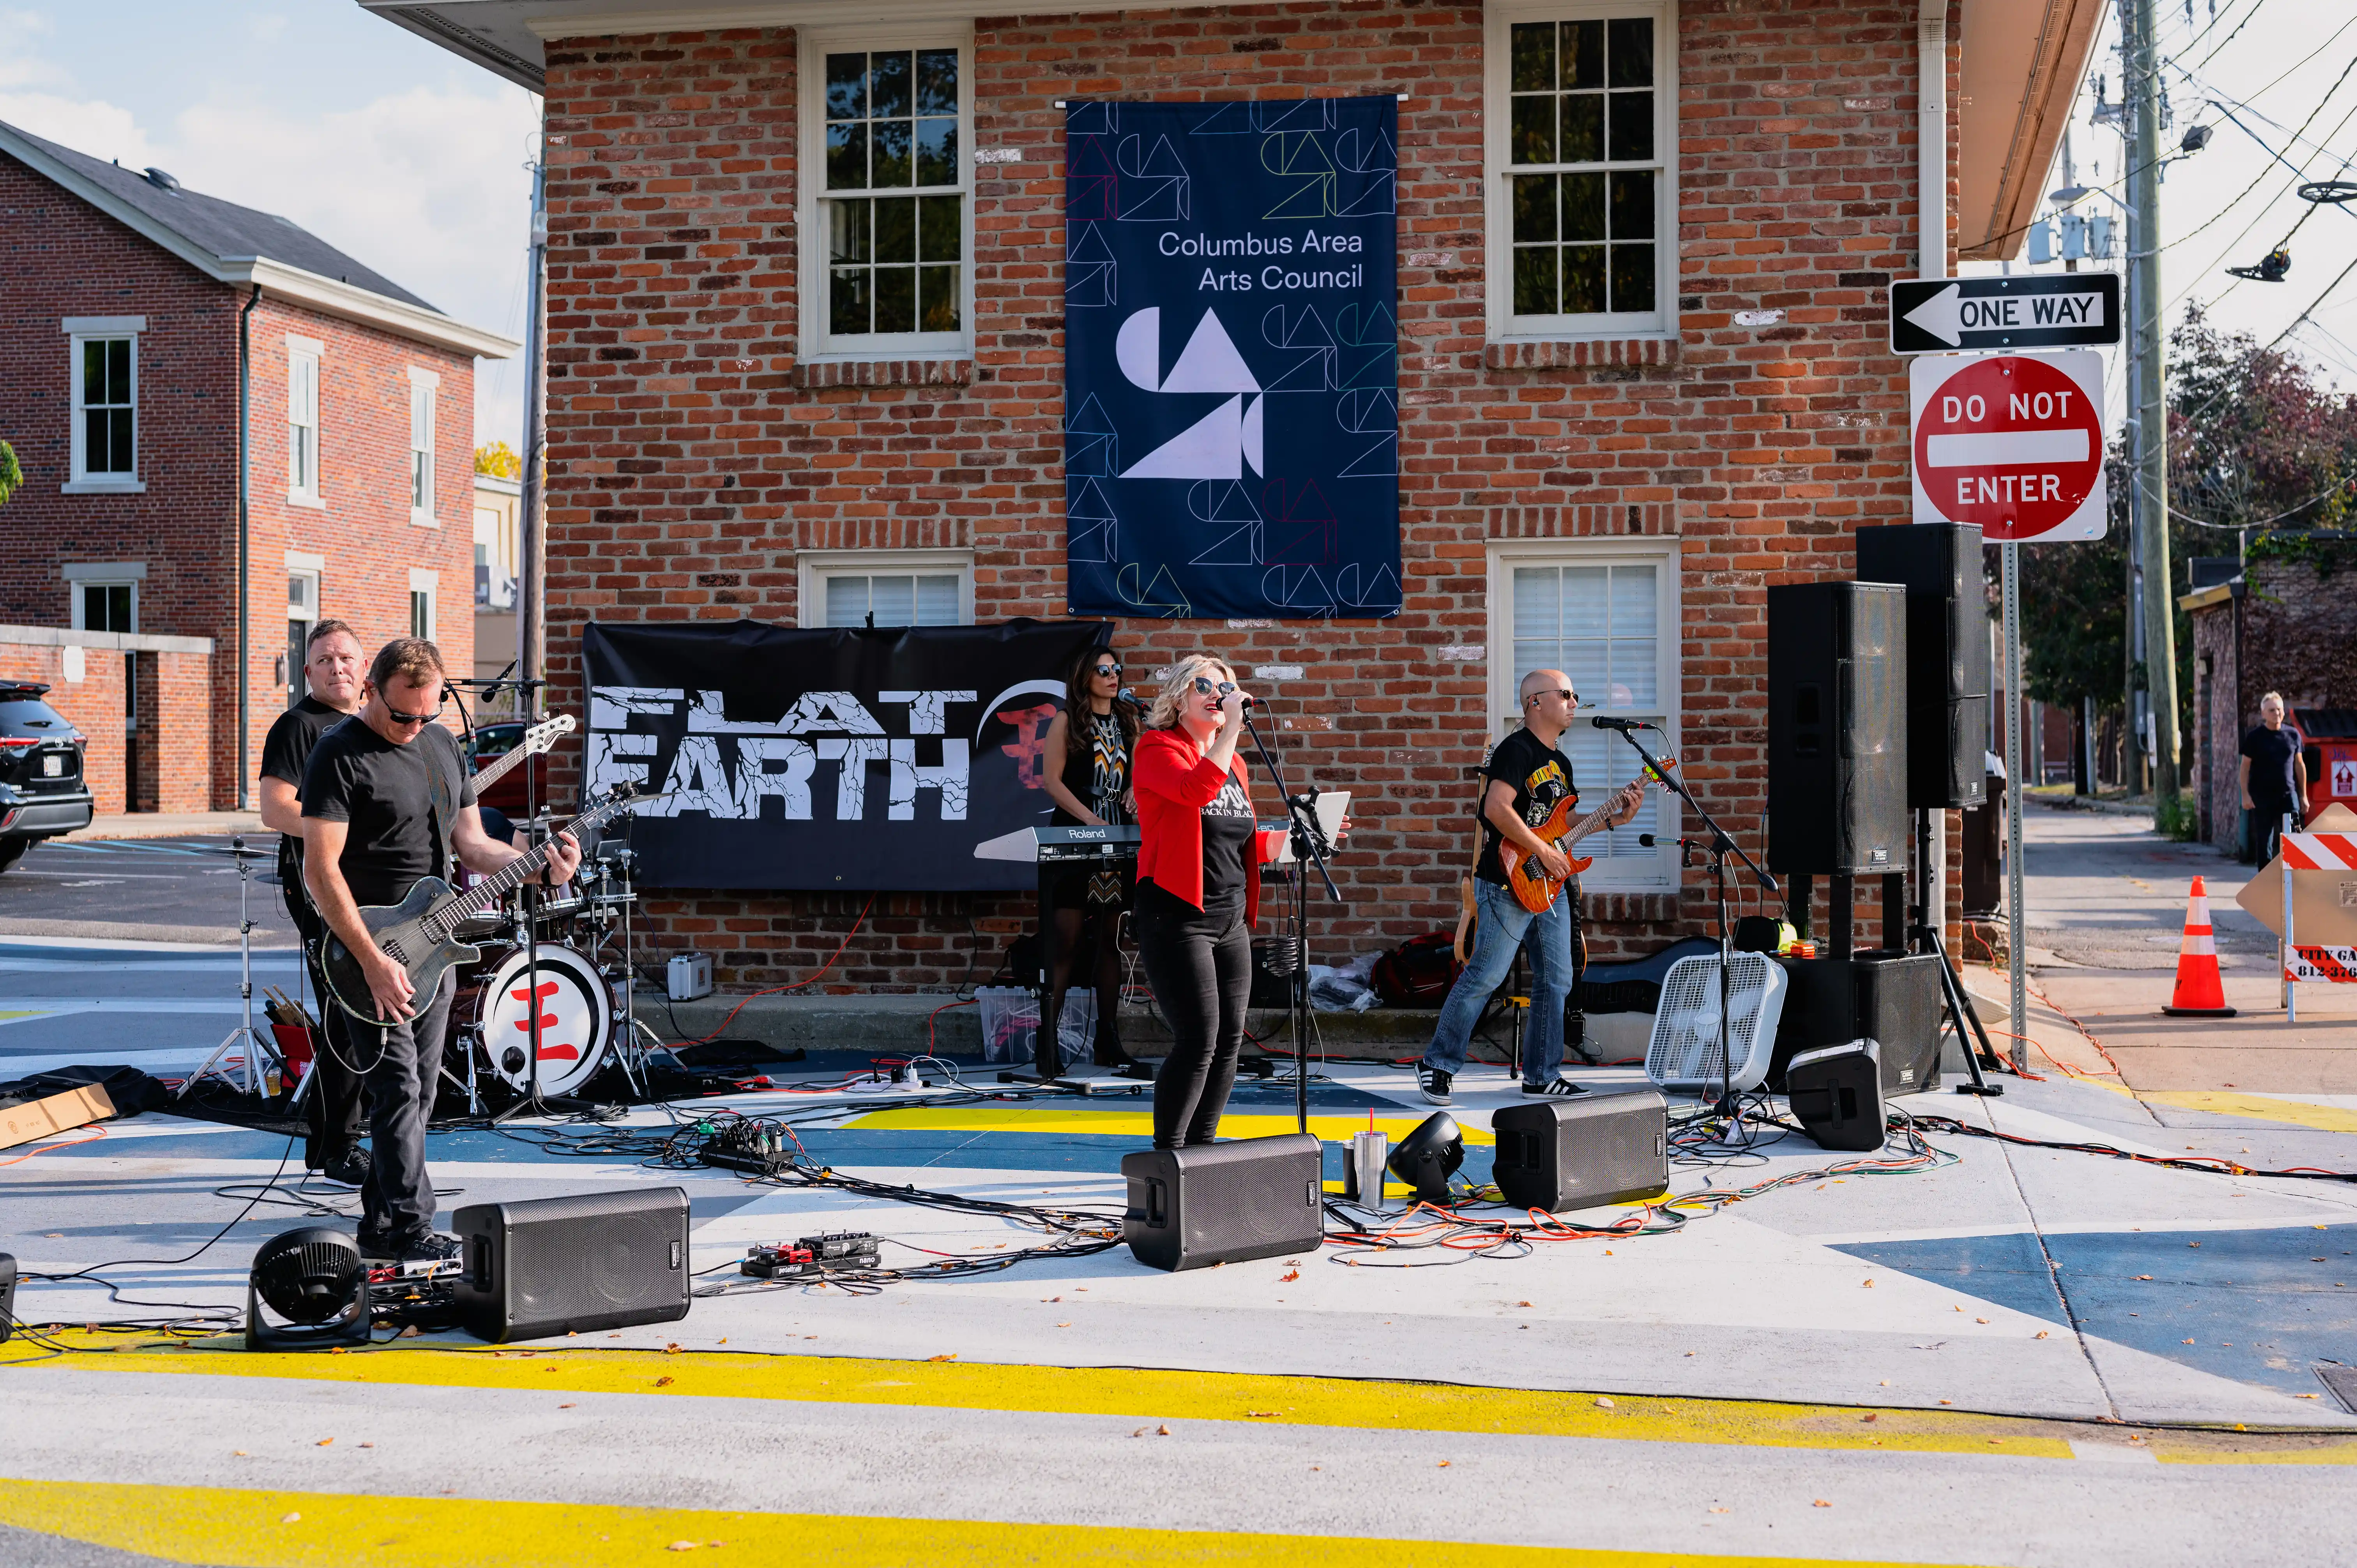 A street band performs outdoors with a drummer, guitarist, and vocalist, a banner reading "Flat Earth" in the background, set against a brick building and street signs.